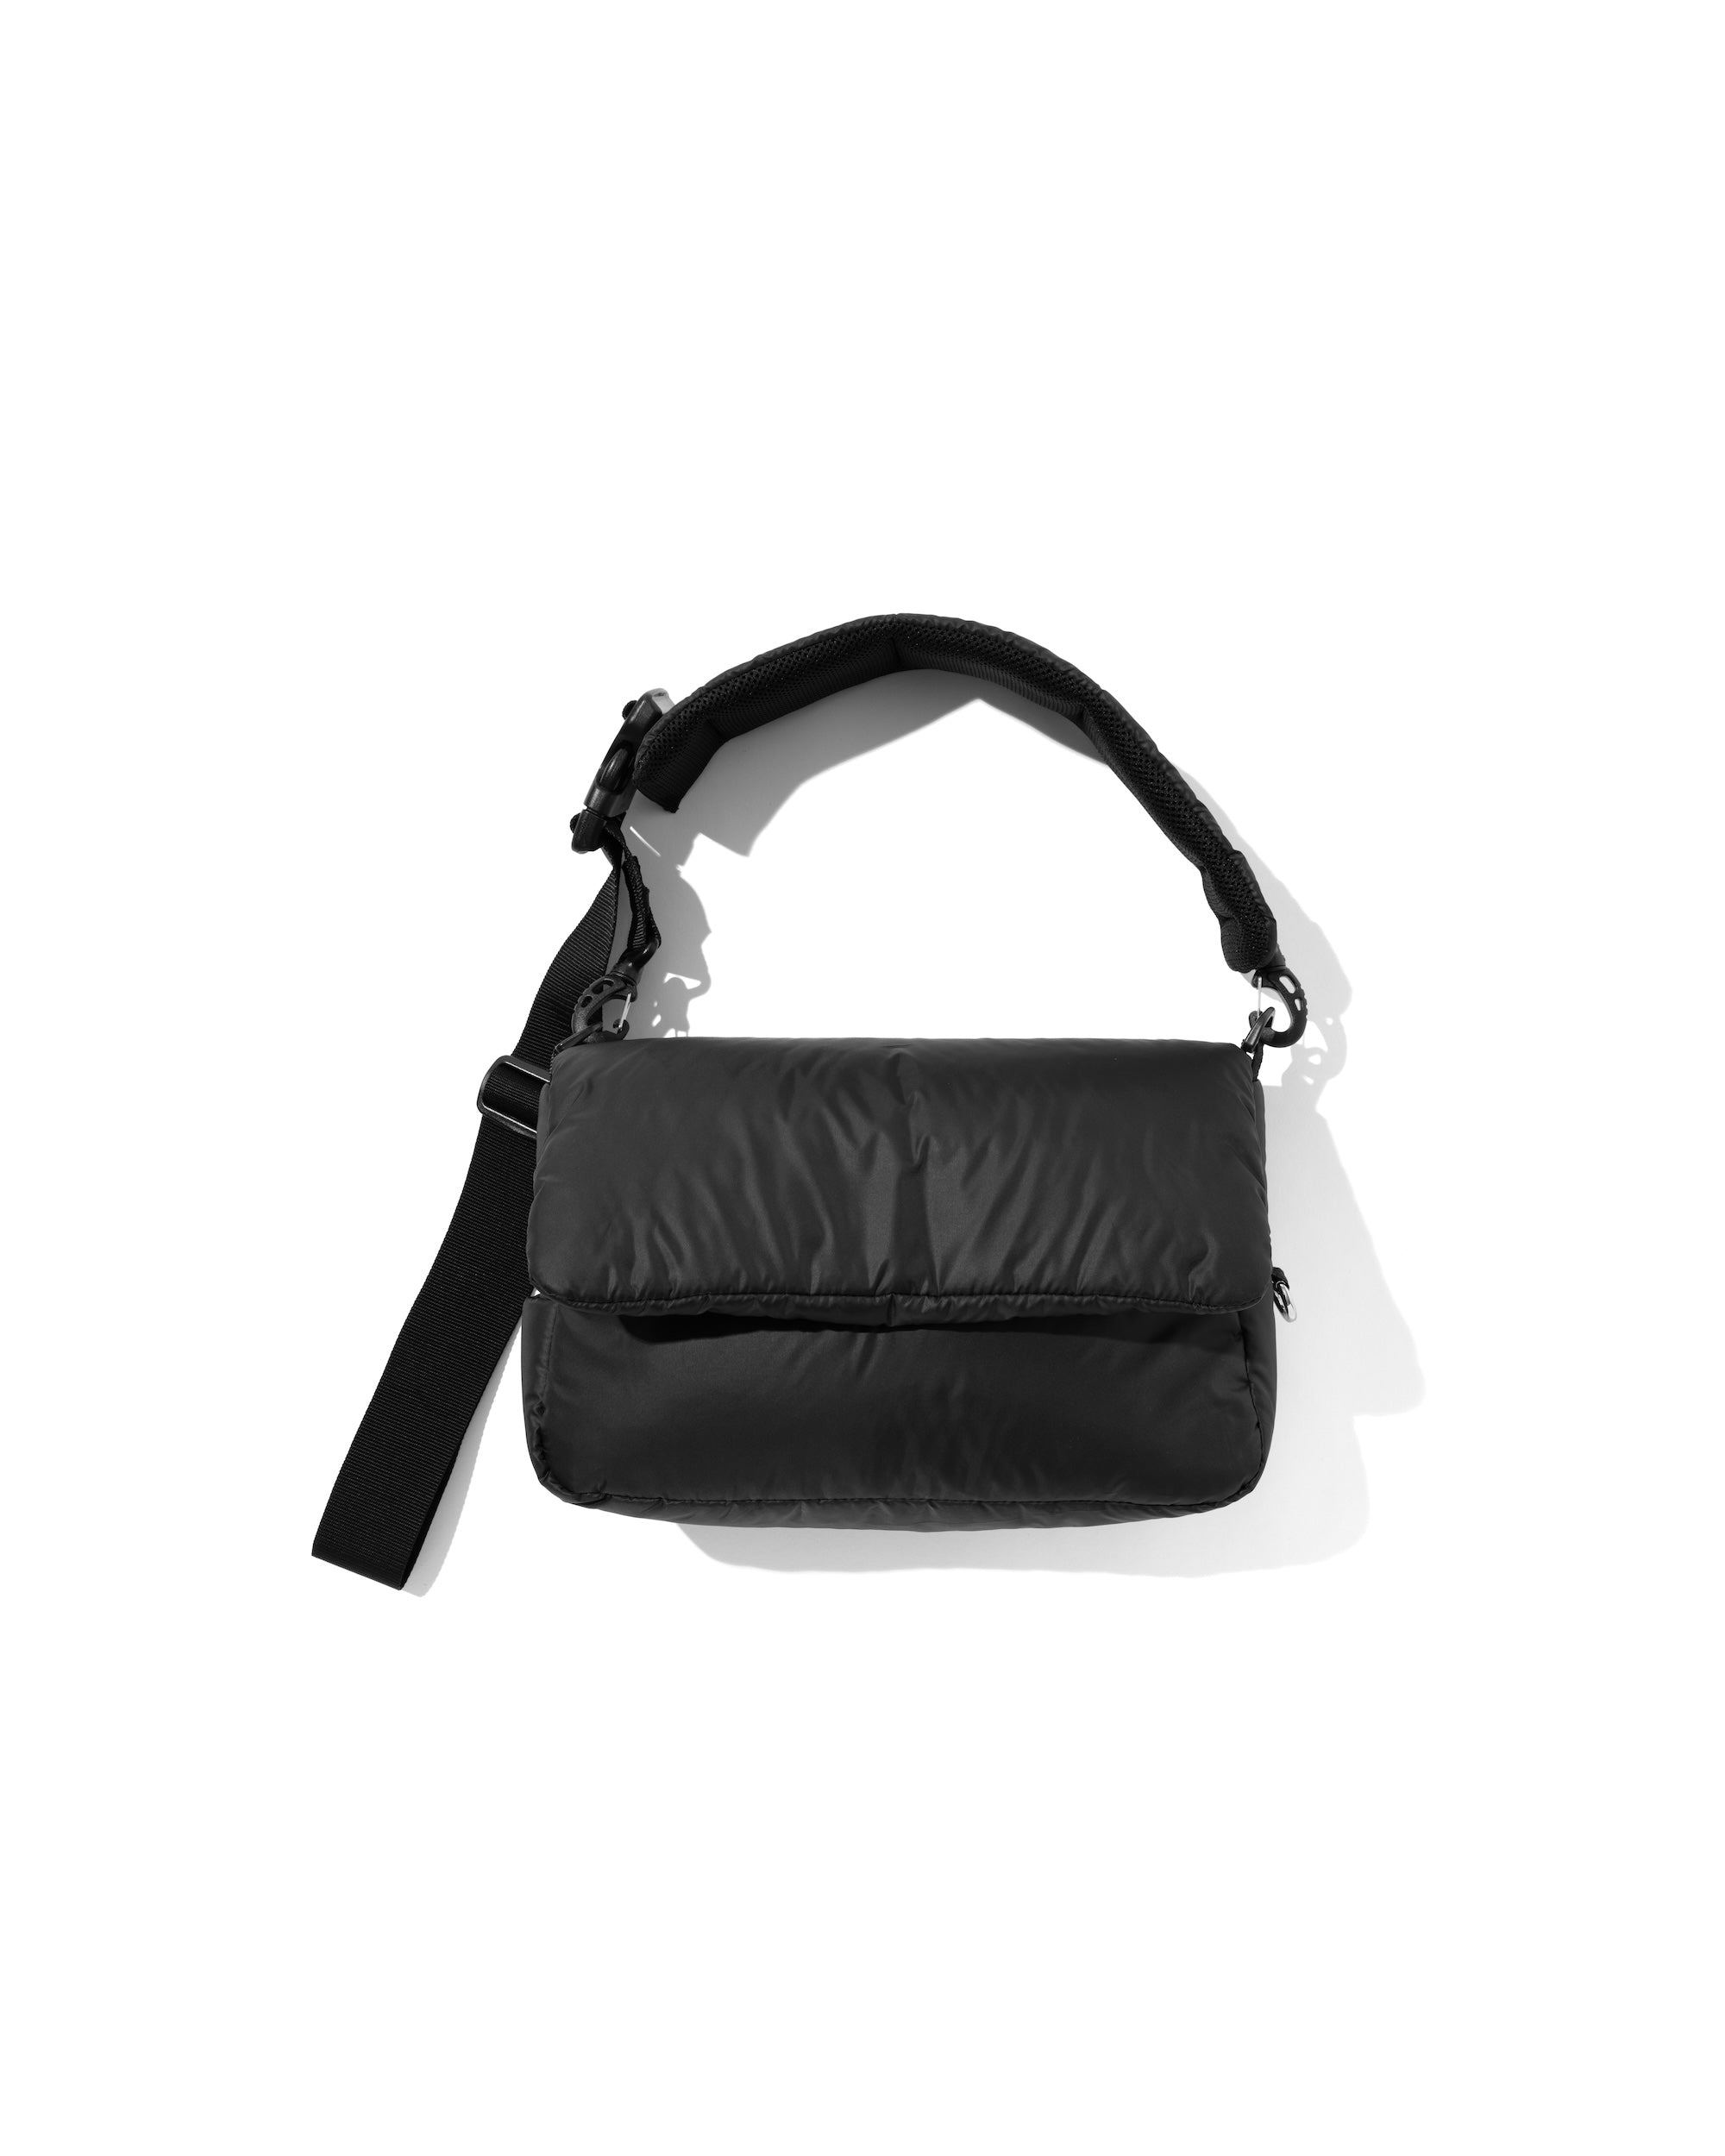 【PRE ORDER】PADDED FLAP HOLIDAY BAG.